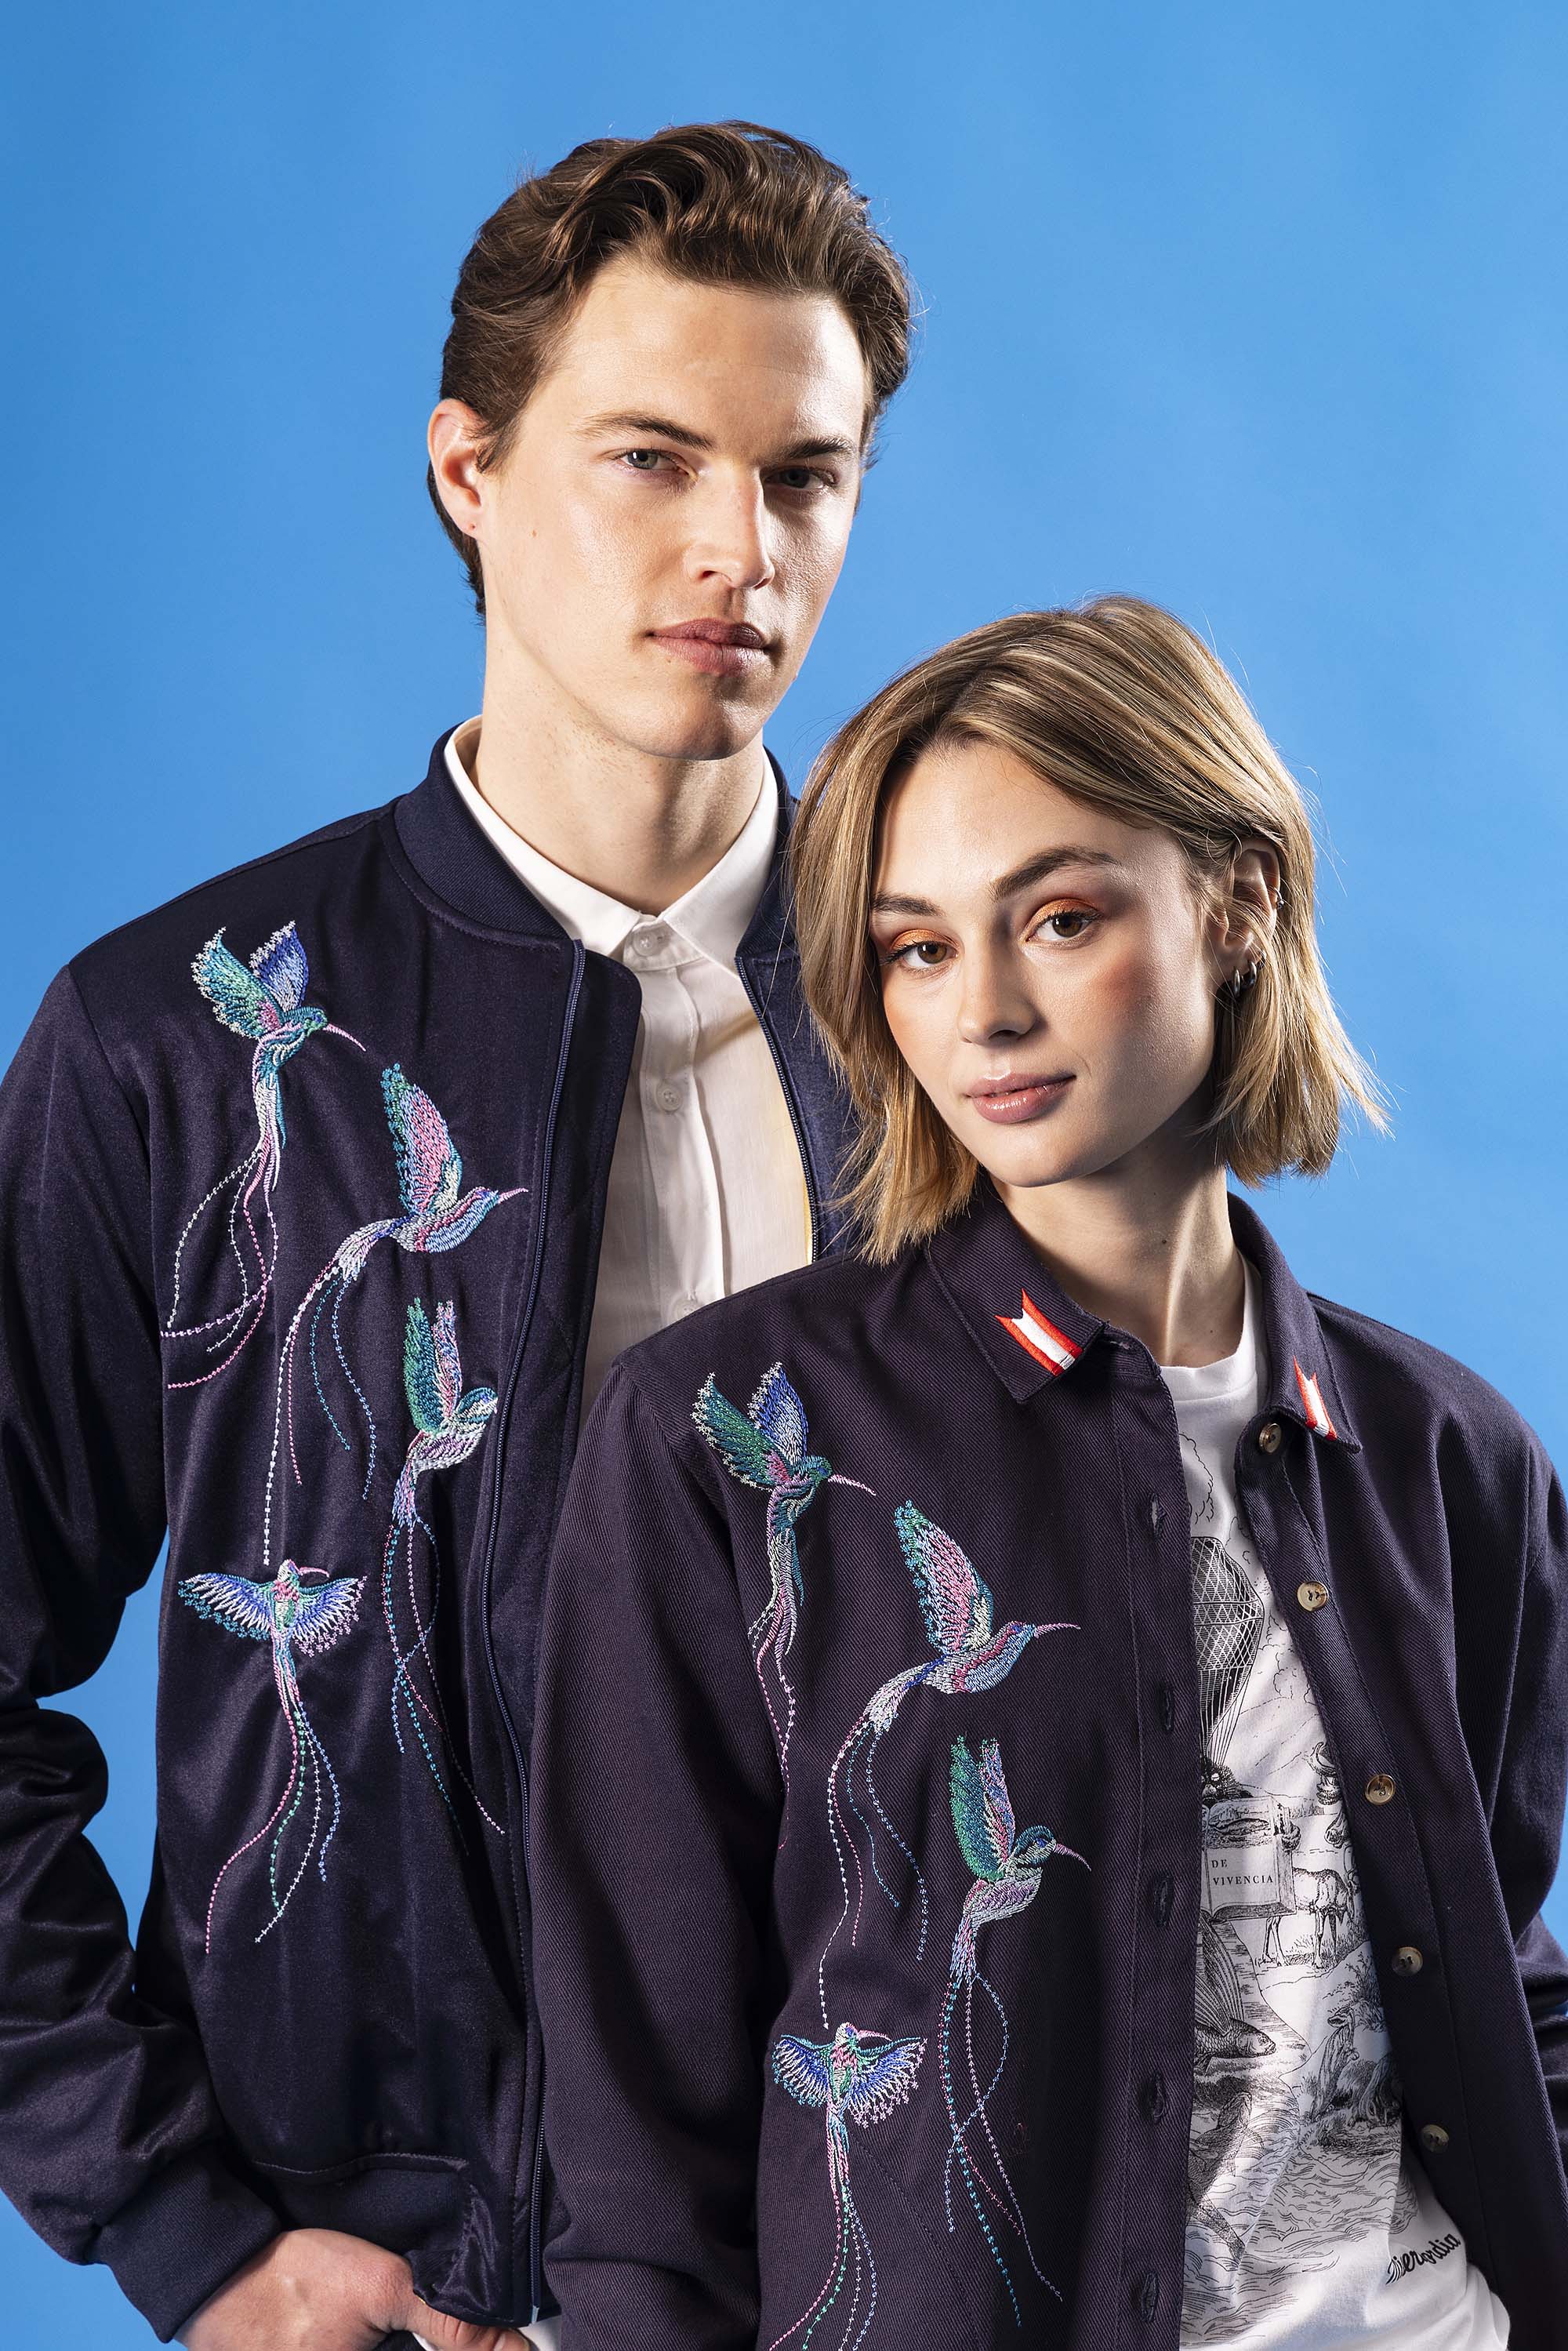 Souvenir bomber jacket for men in navy blue with hummingbird embroidery on the back and ribbing at the neck, cuffs and waist